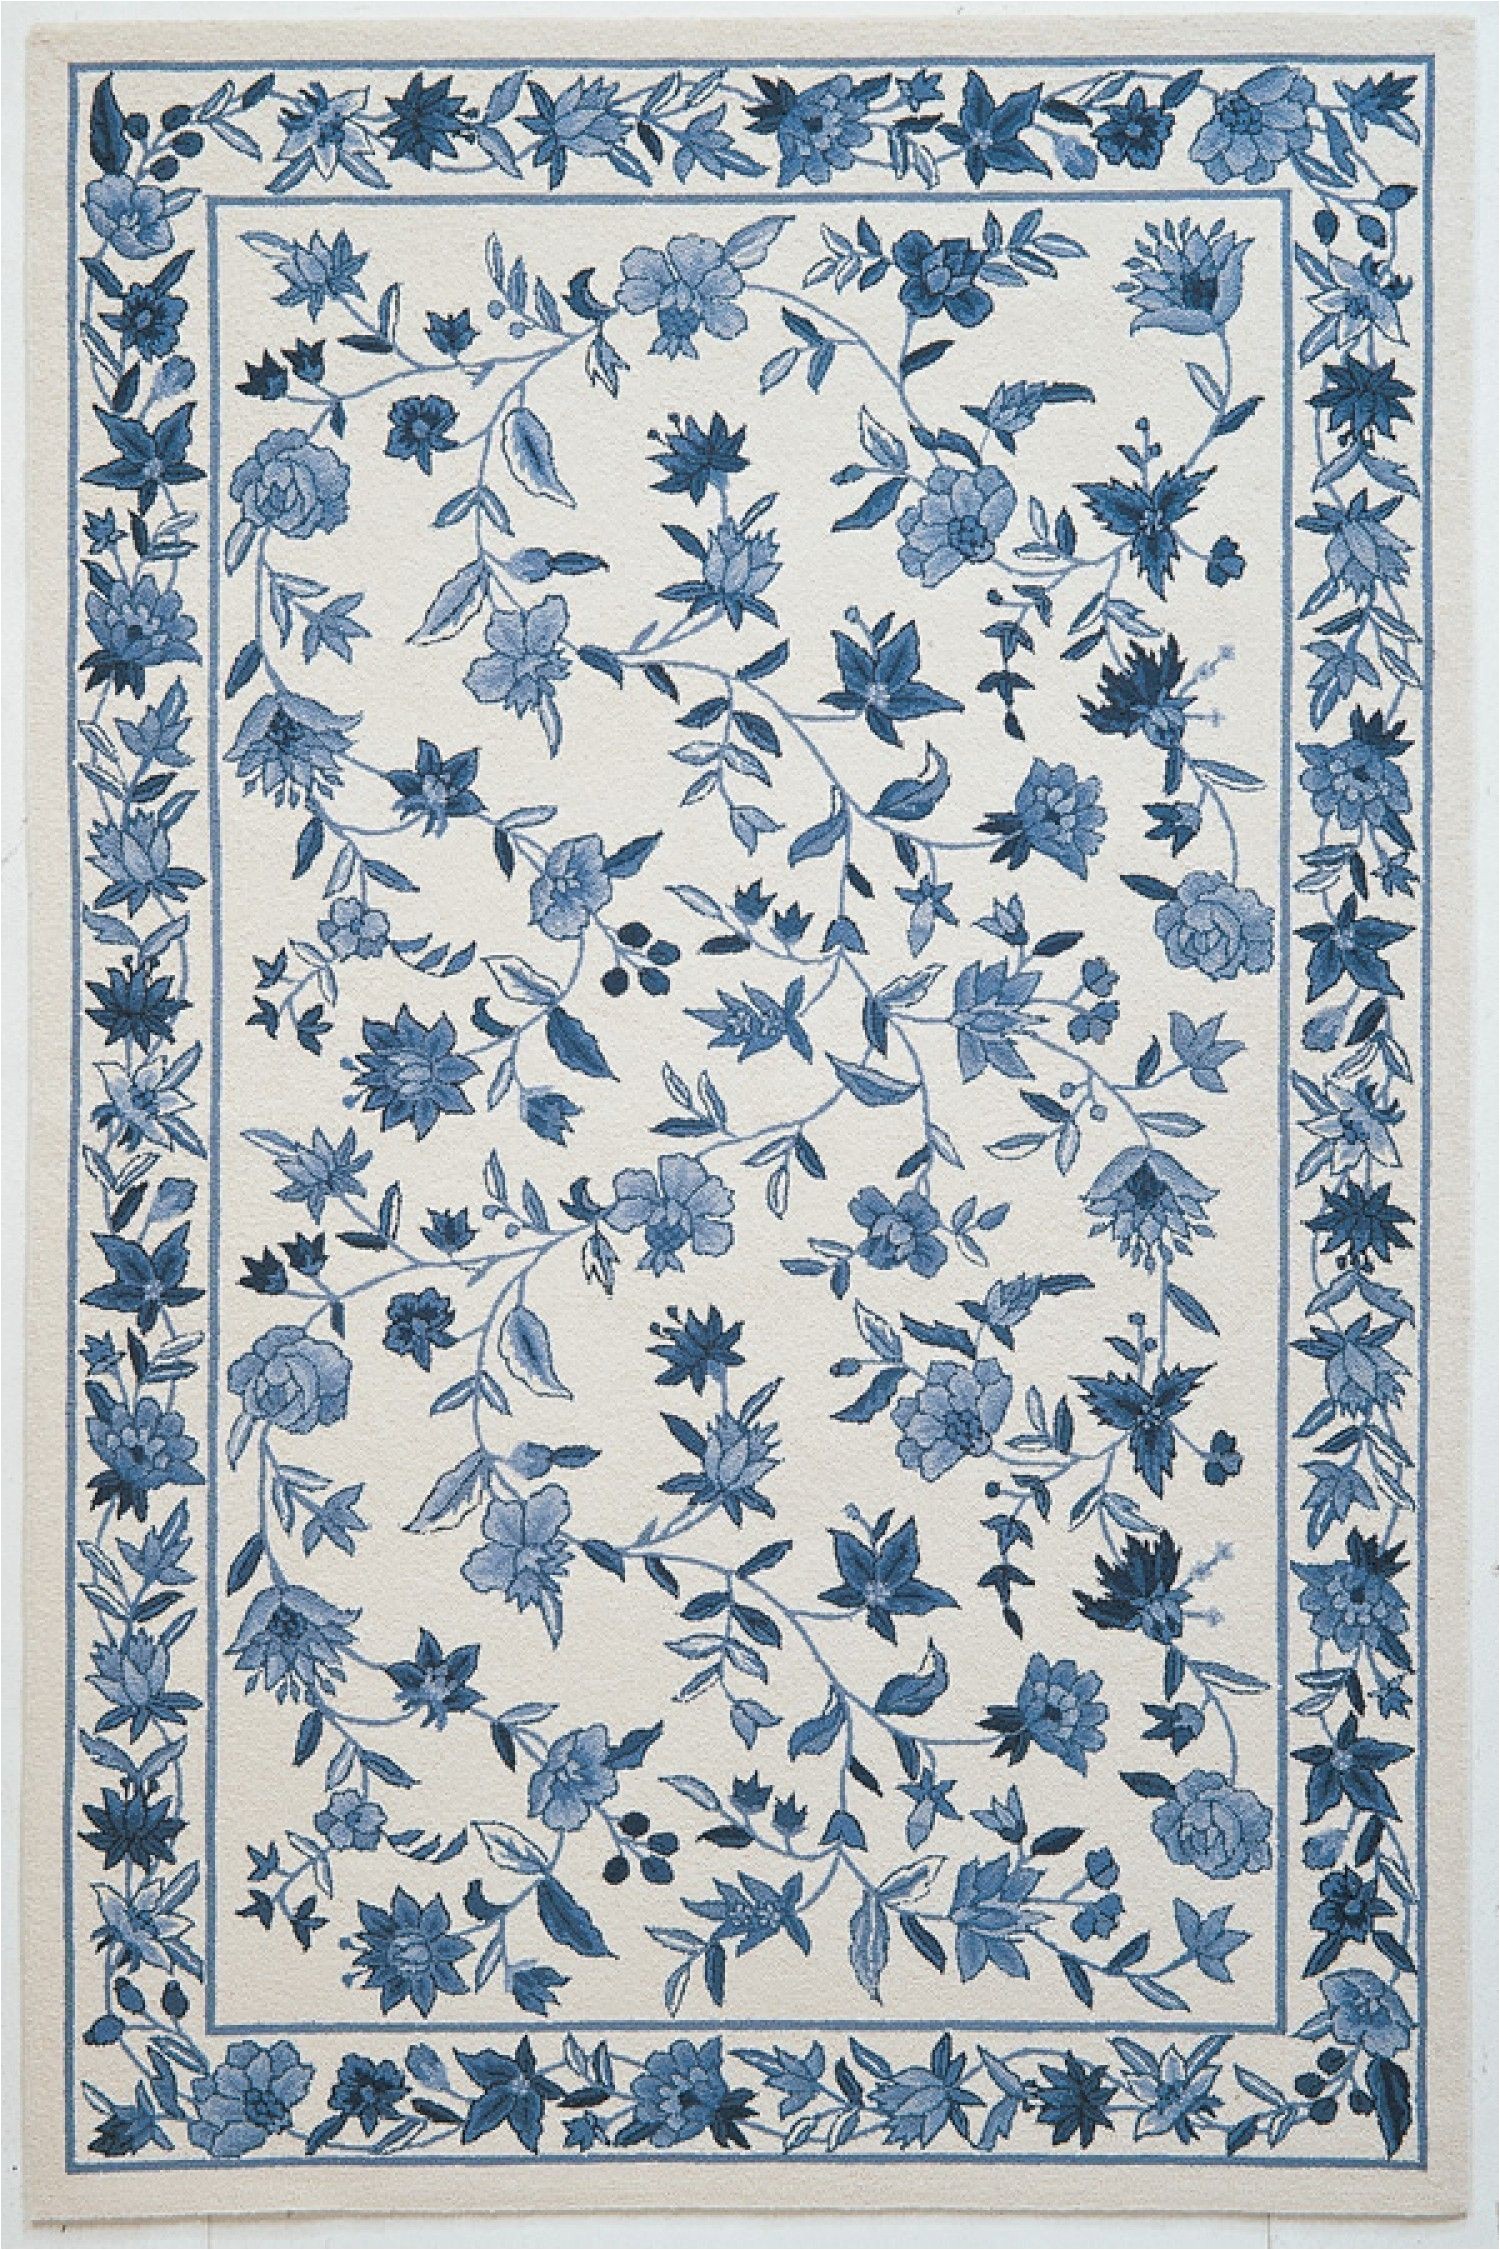 Blue and White Floral Rug Colonial 1727 15002250